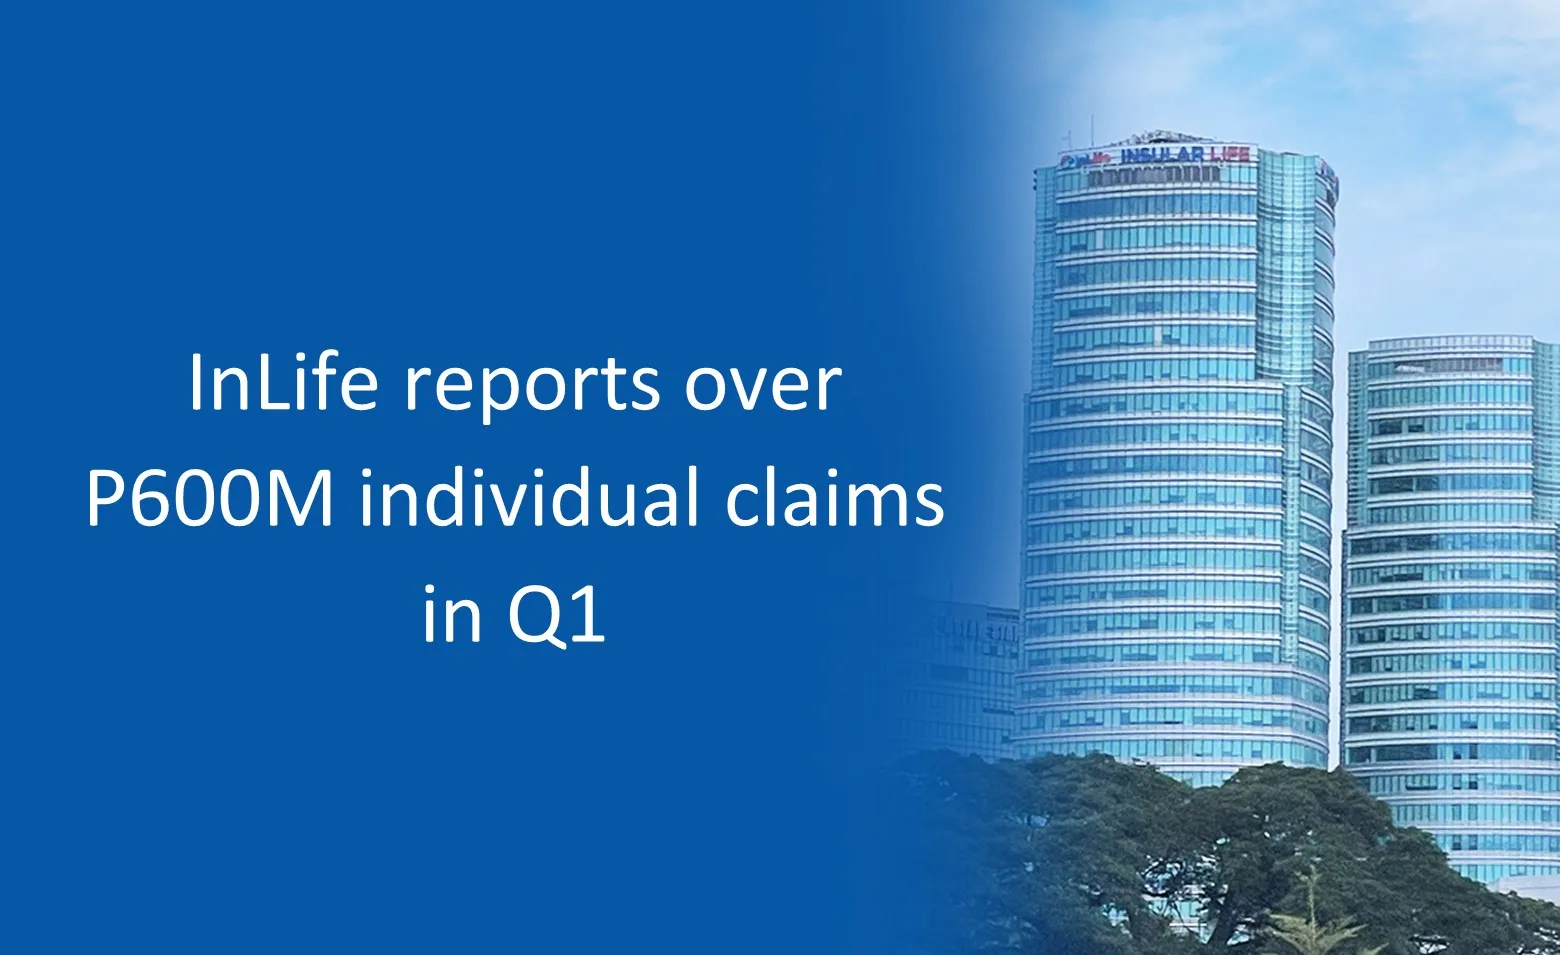 inlife-reports-over-p600m-individual-claims-in-q1